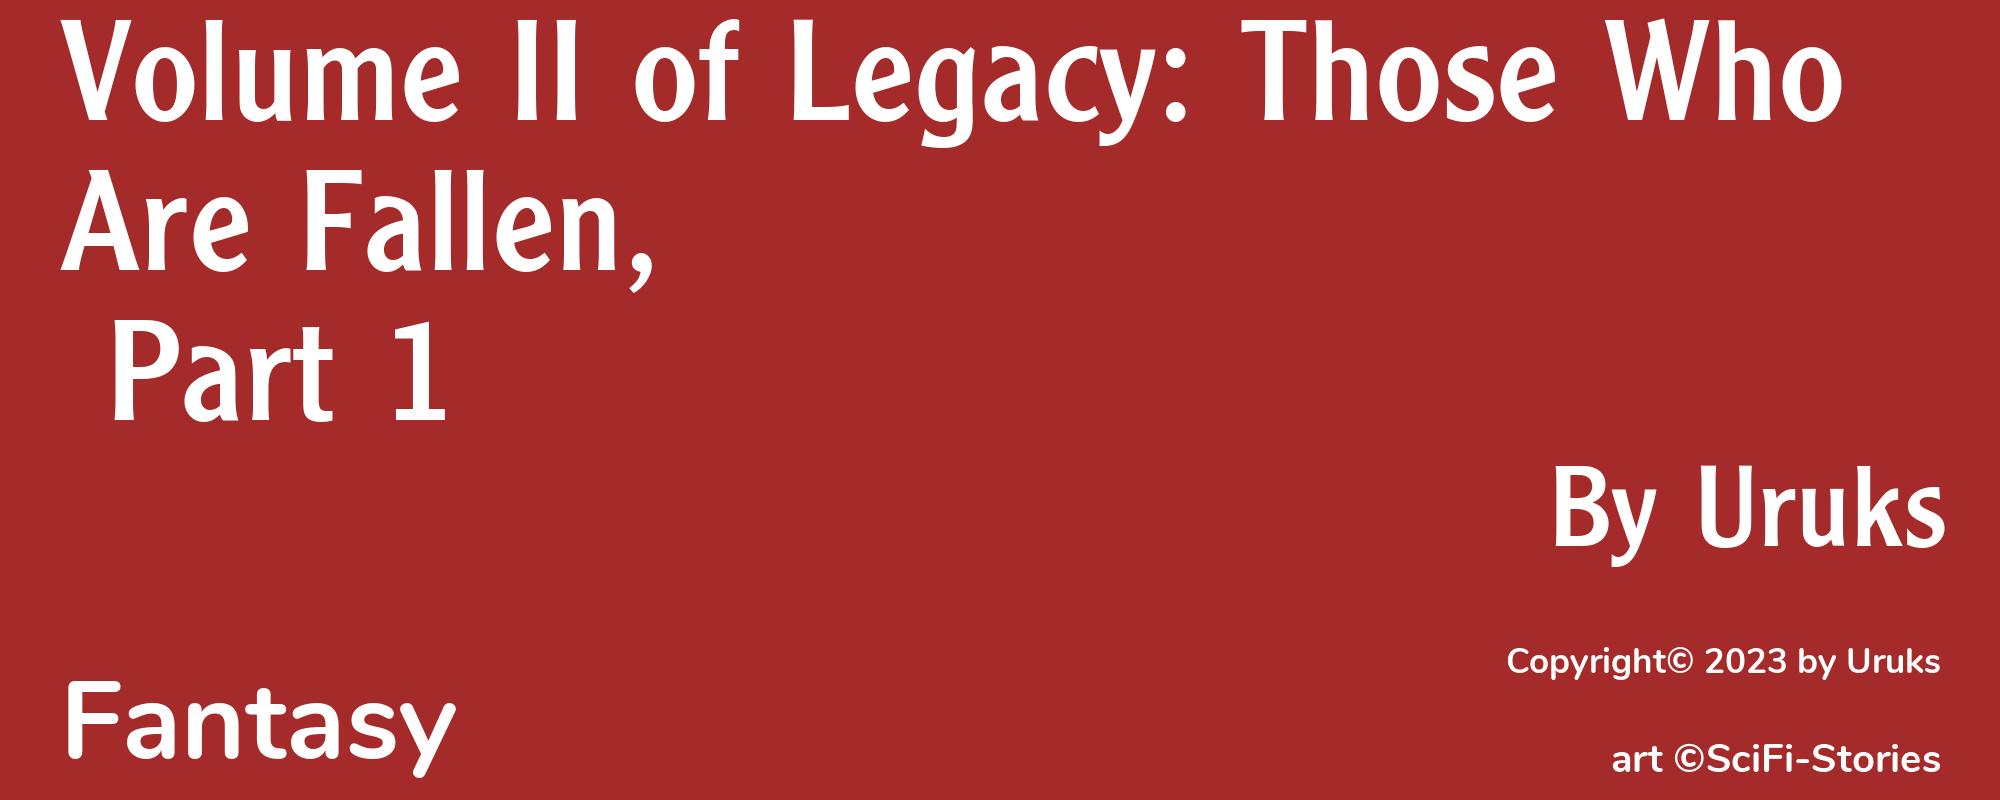 Volume II of Legacy: Those Who Are Fallen, Part 1 - Cover